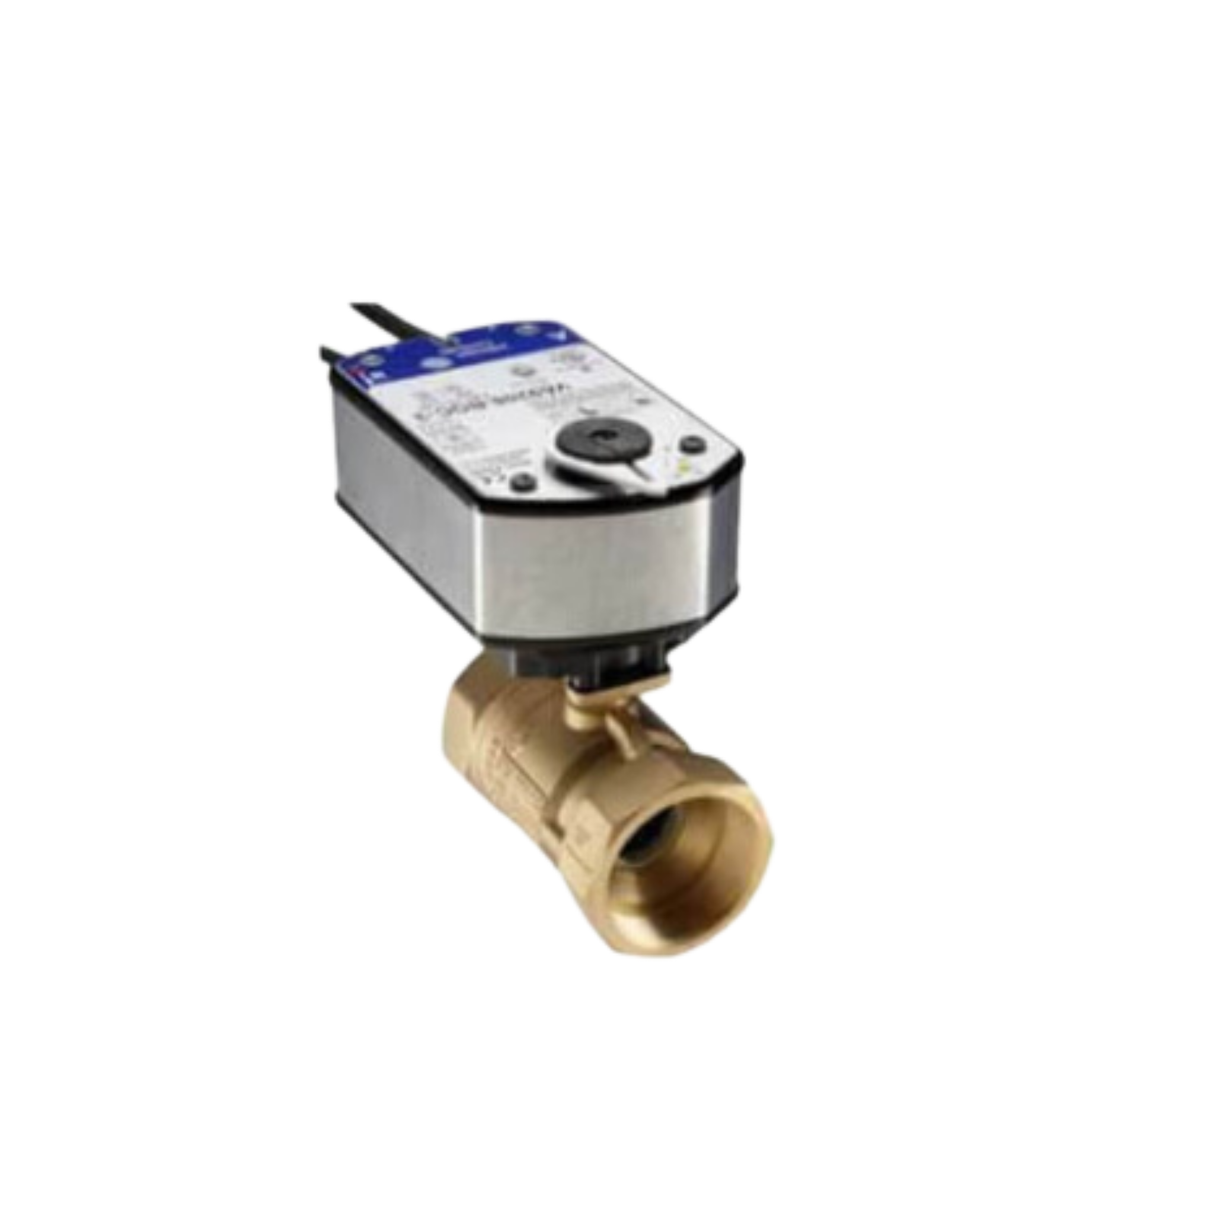 Johnson Controls VG1245DP+938BGC 24VAC, 24VDC, 1 1/4" NPT Connection Size, 2 Way, Equal Percentage Flow, Actuated, Valve with 2 SPDT Auxiliary Switches